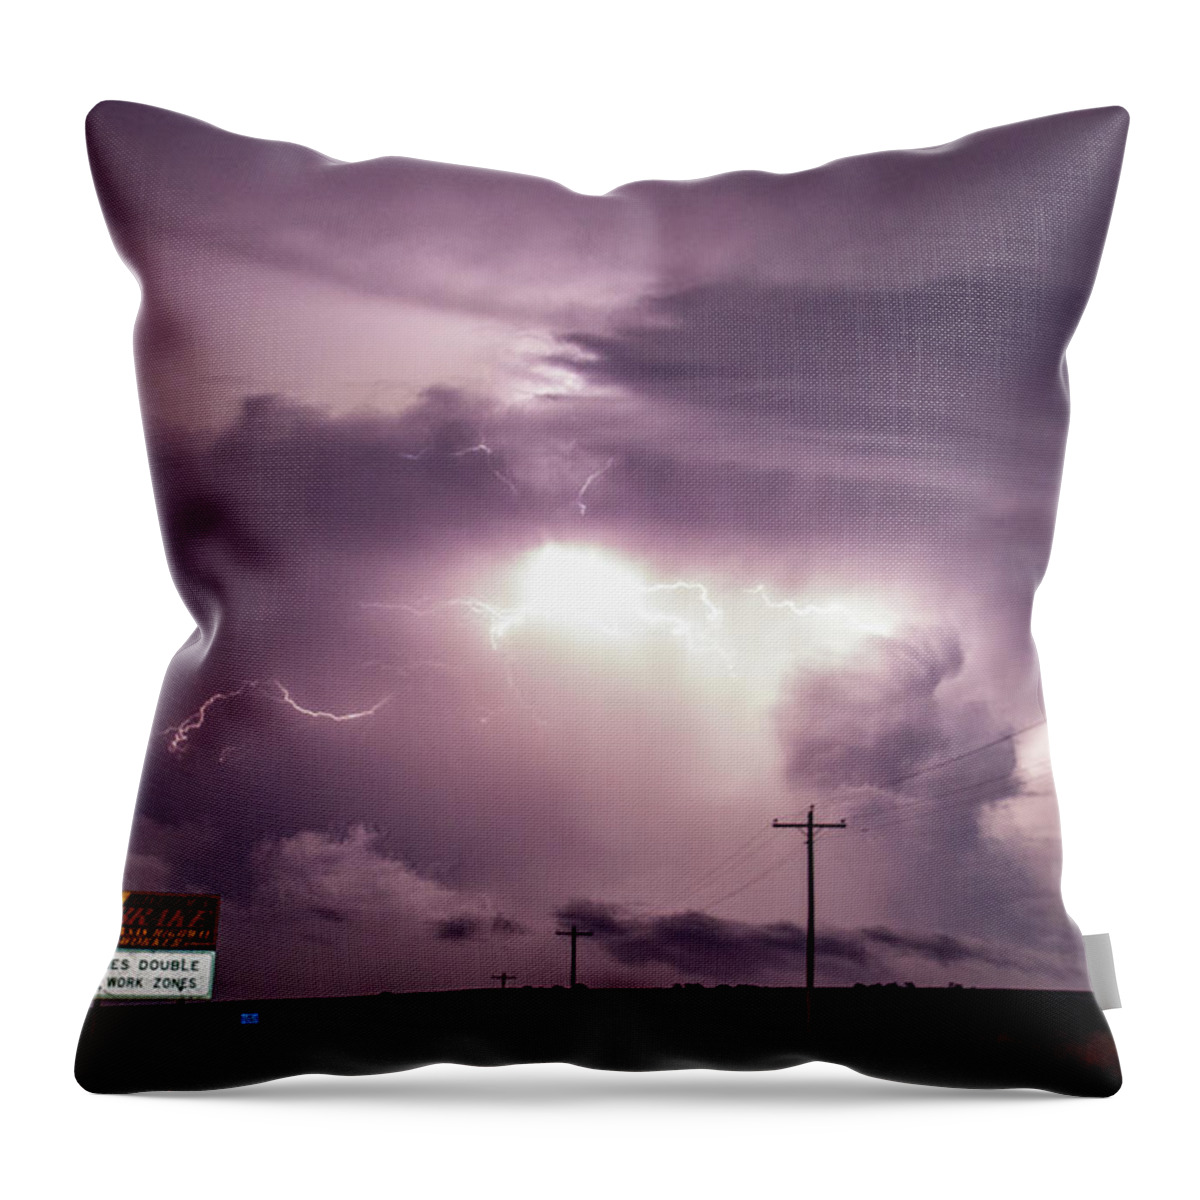 Nebraskasc Throw Pillow featuring the photograph Chasing Night Tornadoes 003 by Dale Kaminski